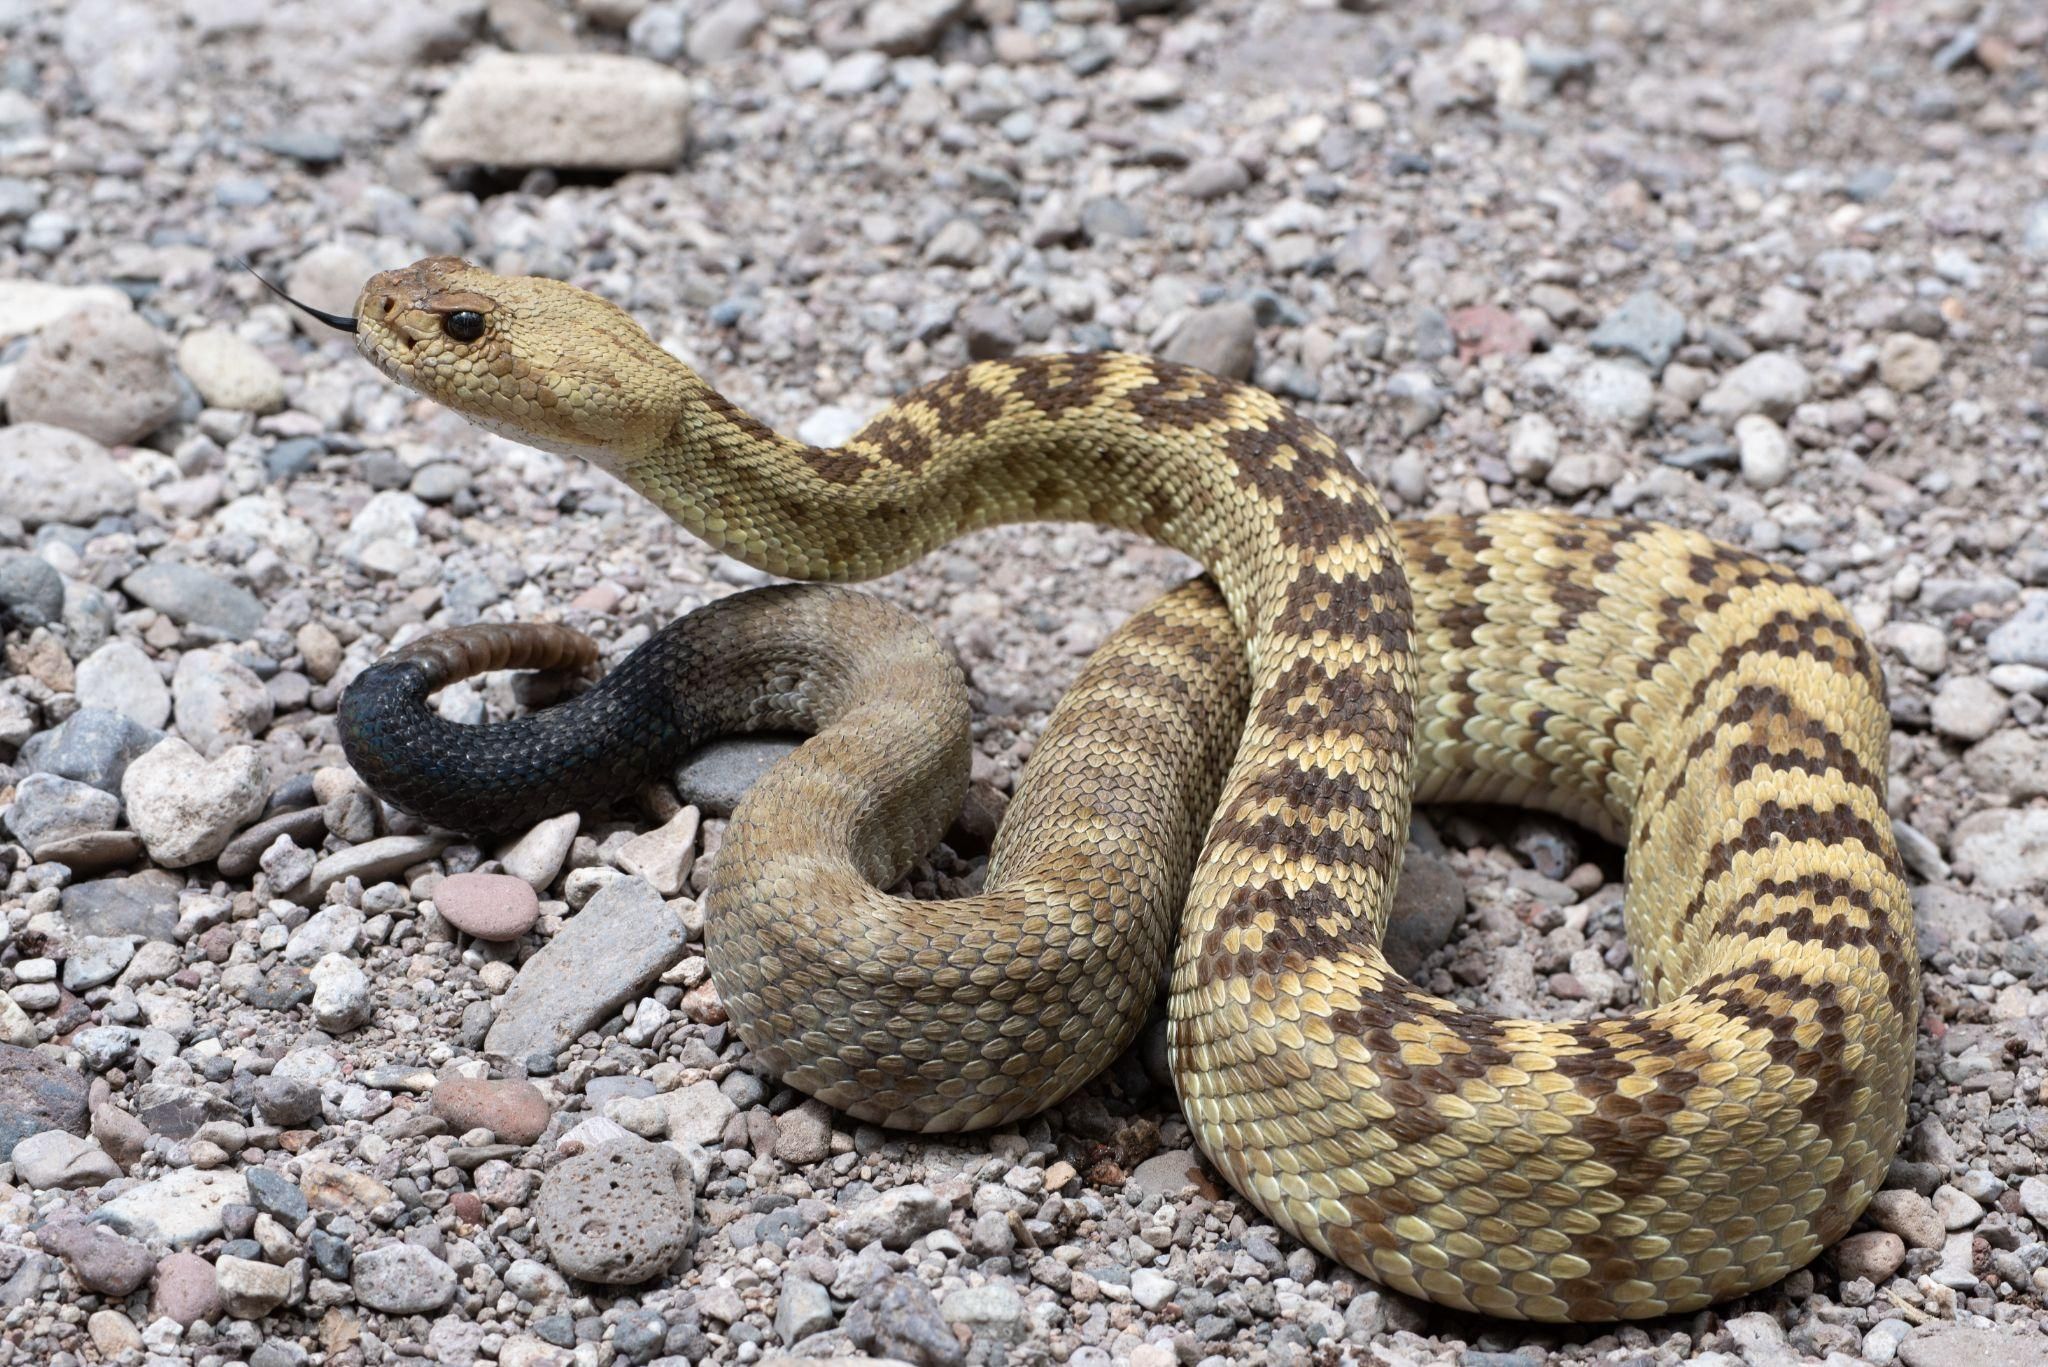 The northern black-tailed rattlesnake is commonly encountered in the rocky deserts and foothills of far southwestern New Mexico. 